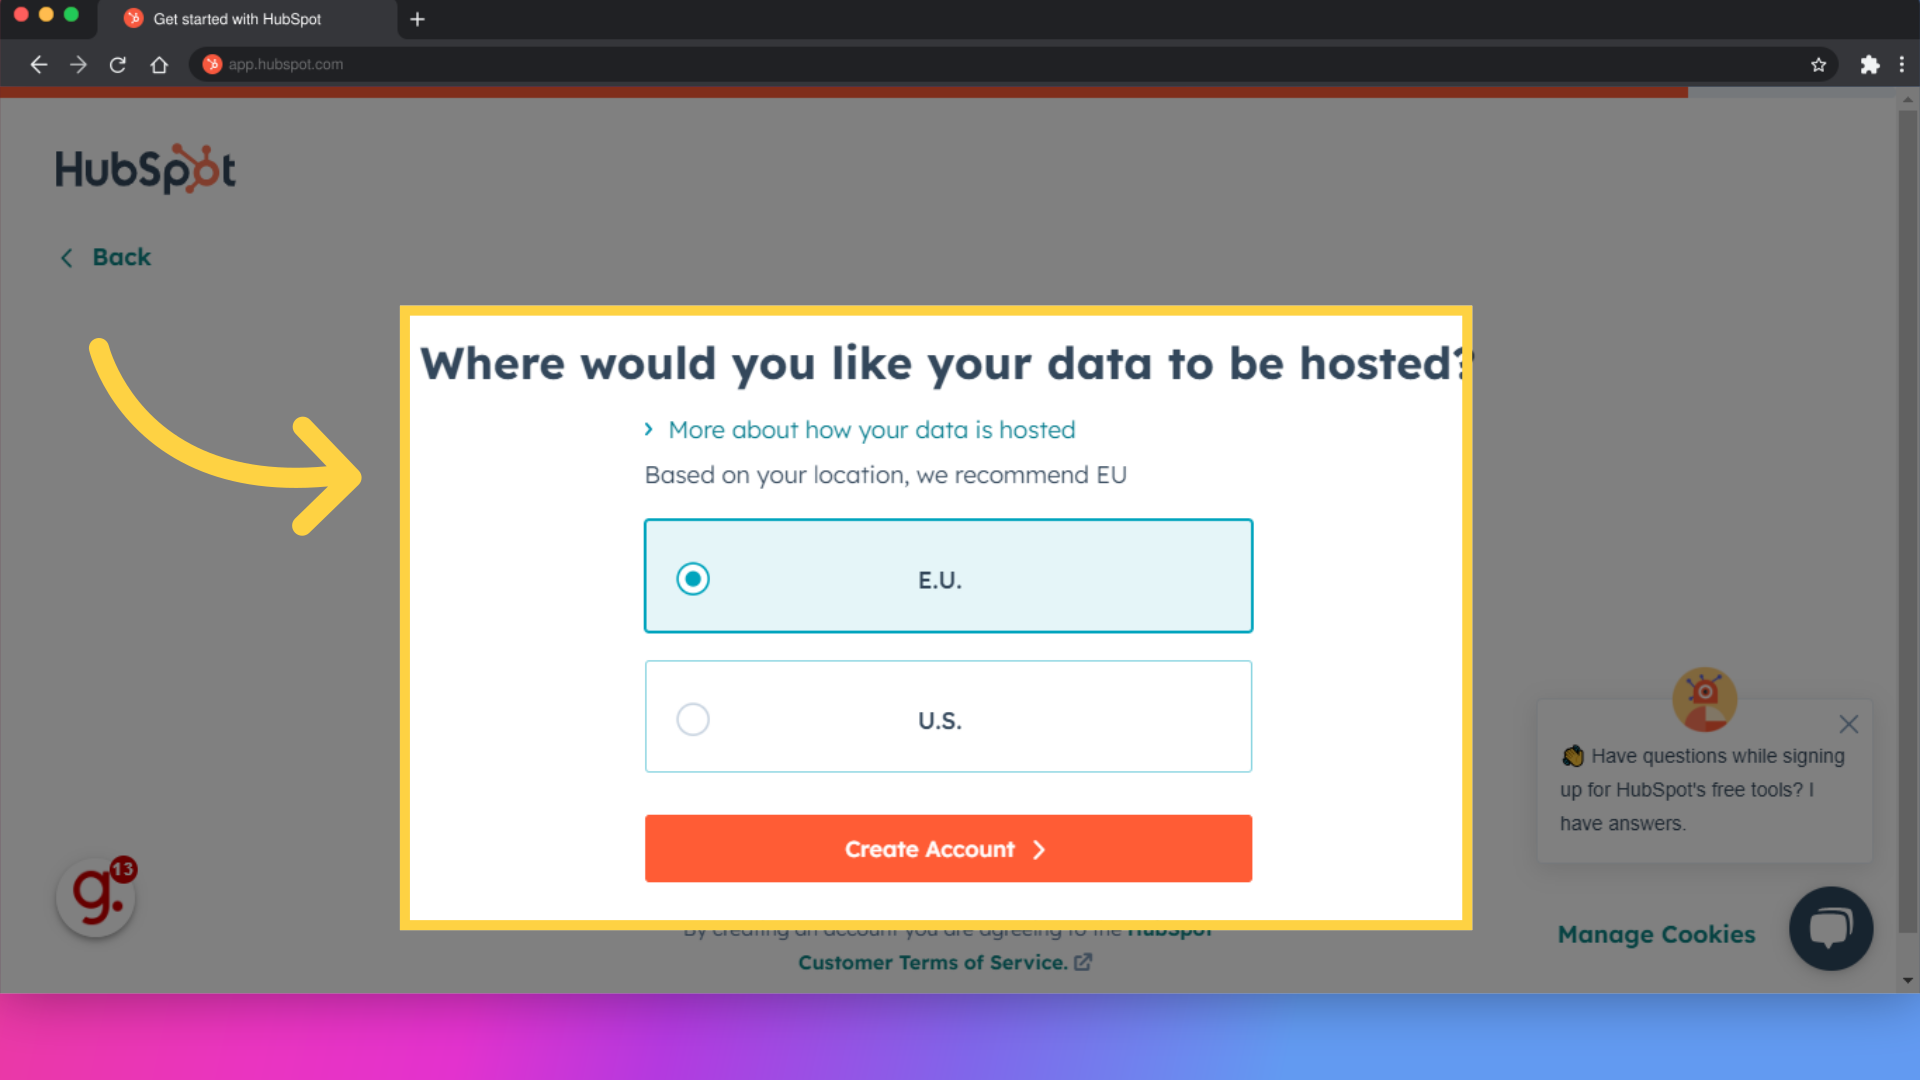 Click 'More about how your data is hosted'